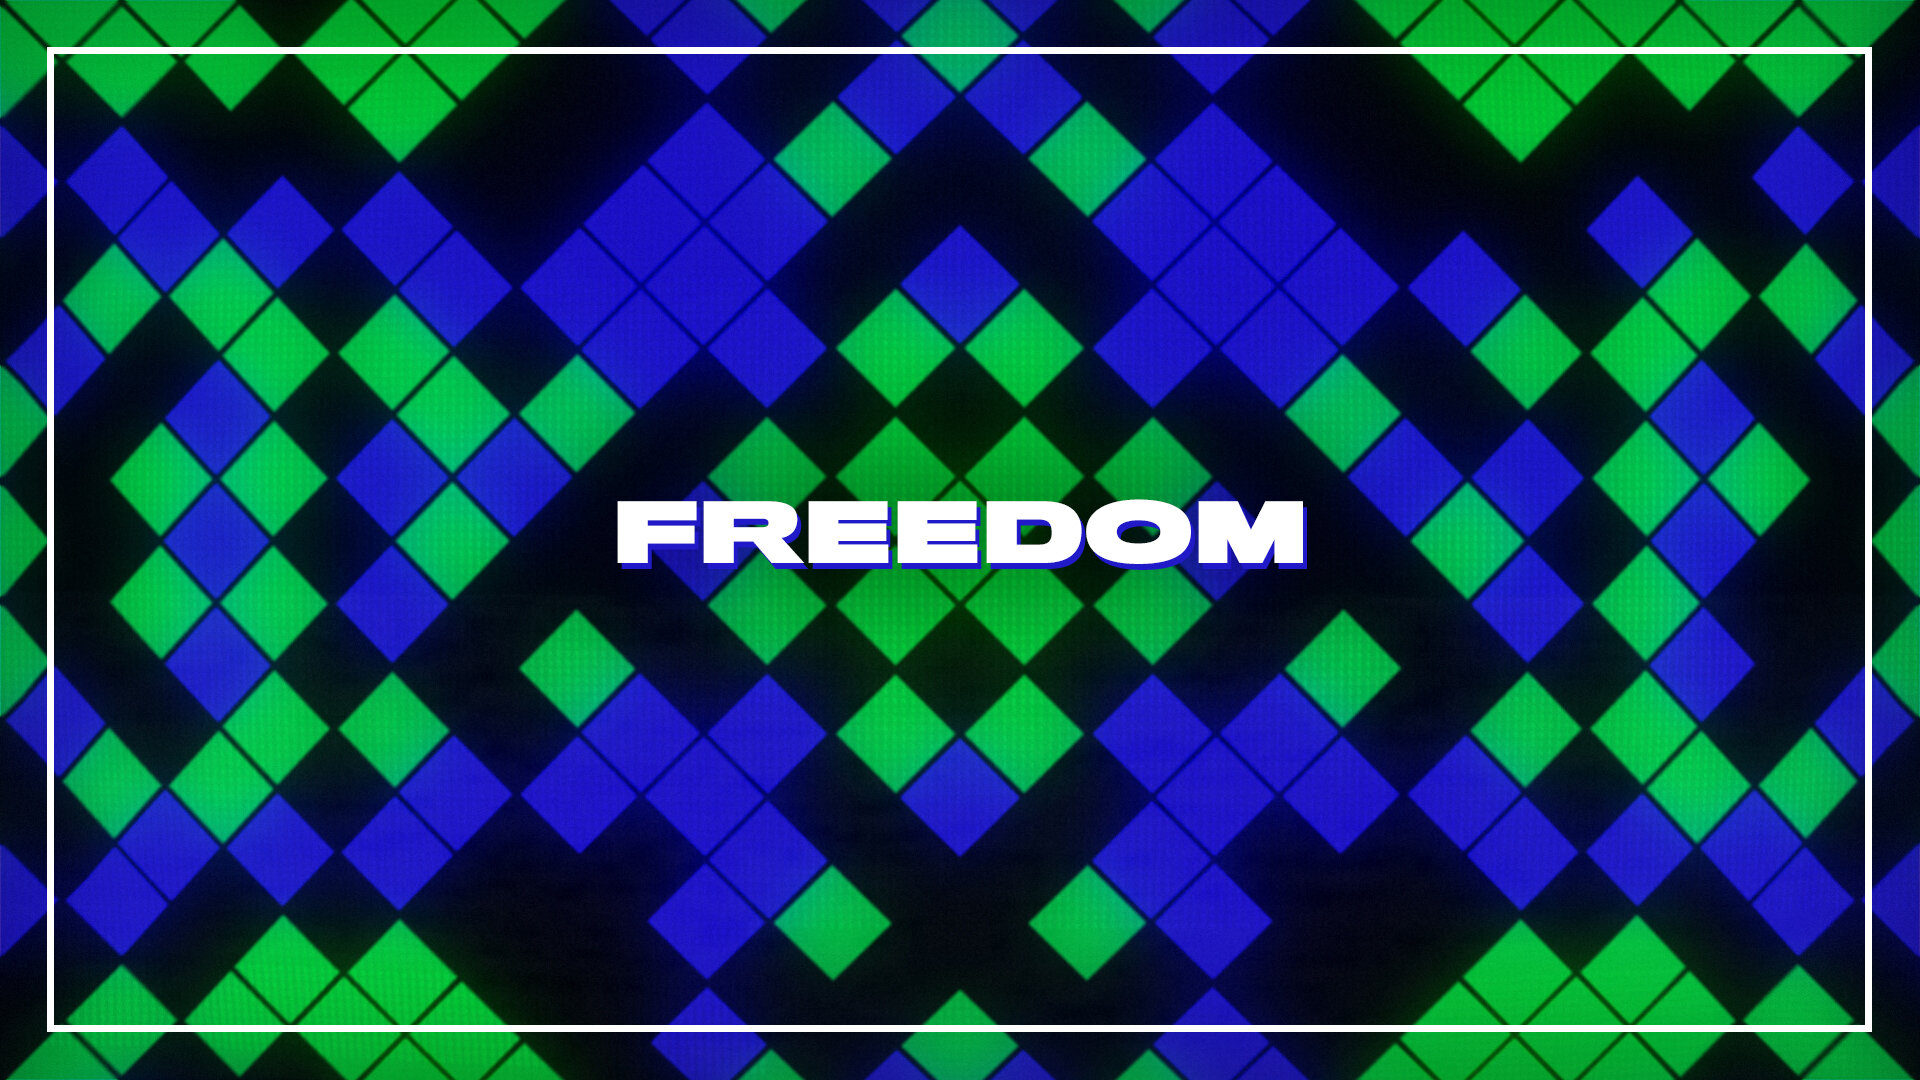 SeeingSounds_Freedom_Thumbnail.jpg